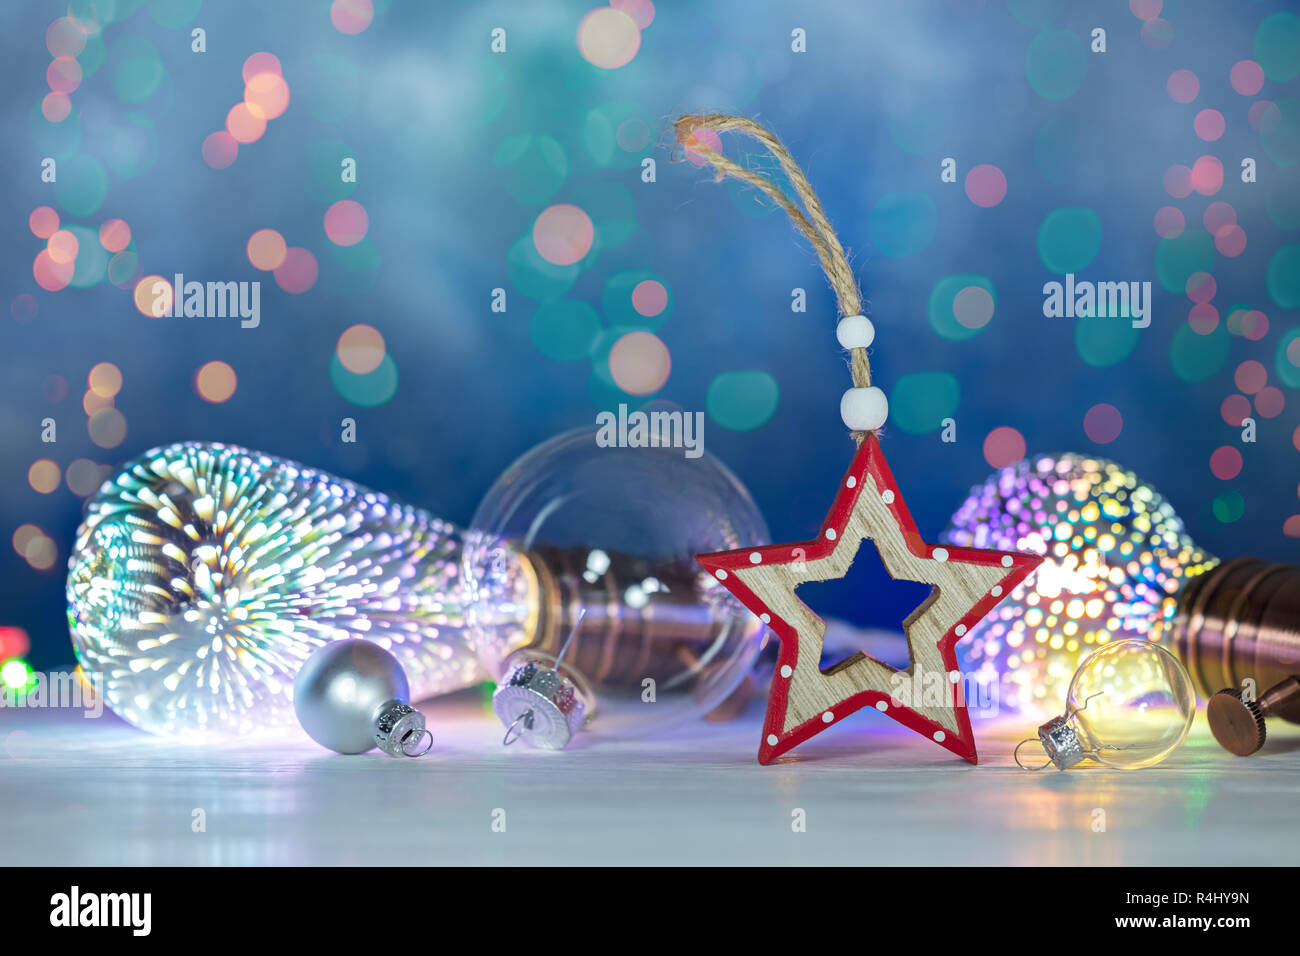 christmas background with retro light lamps, decorative christmas tree balls and wooden star. new year festive background Stock Photo